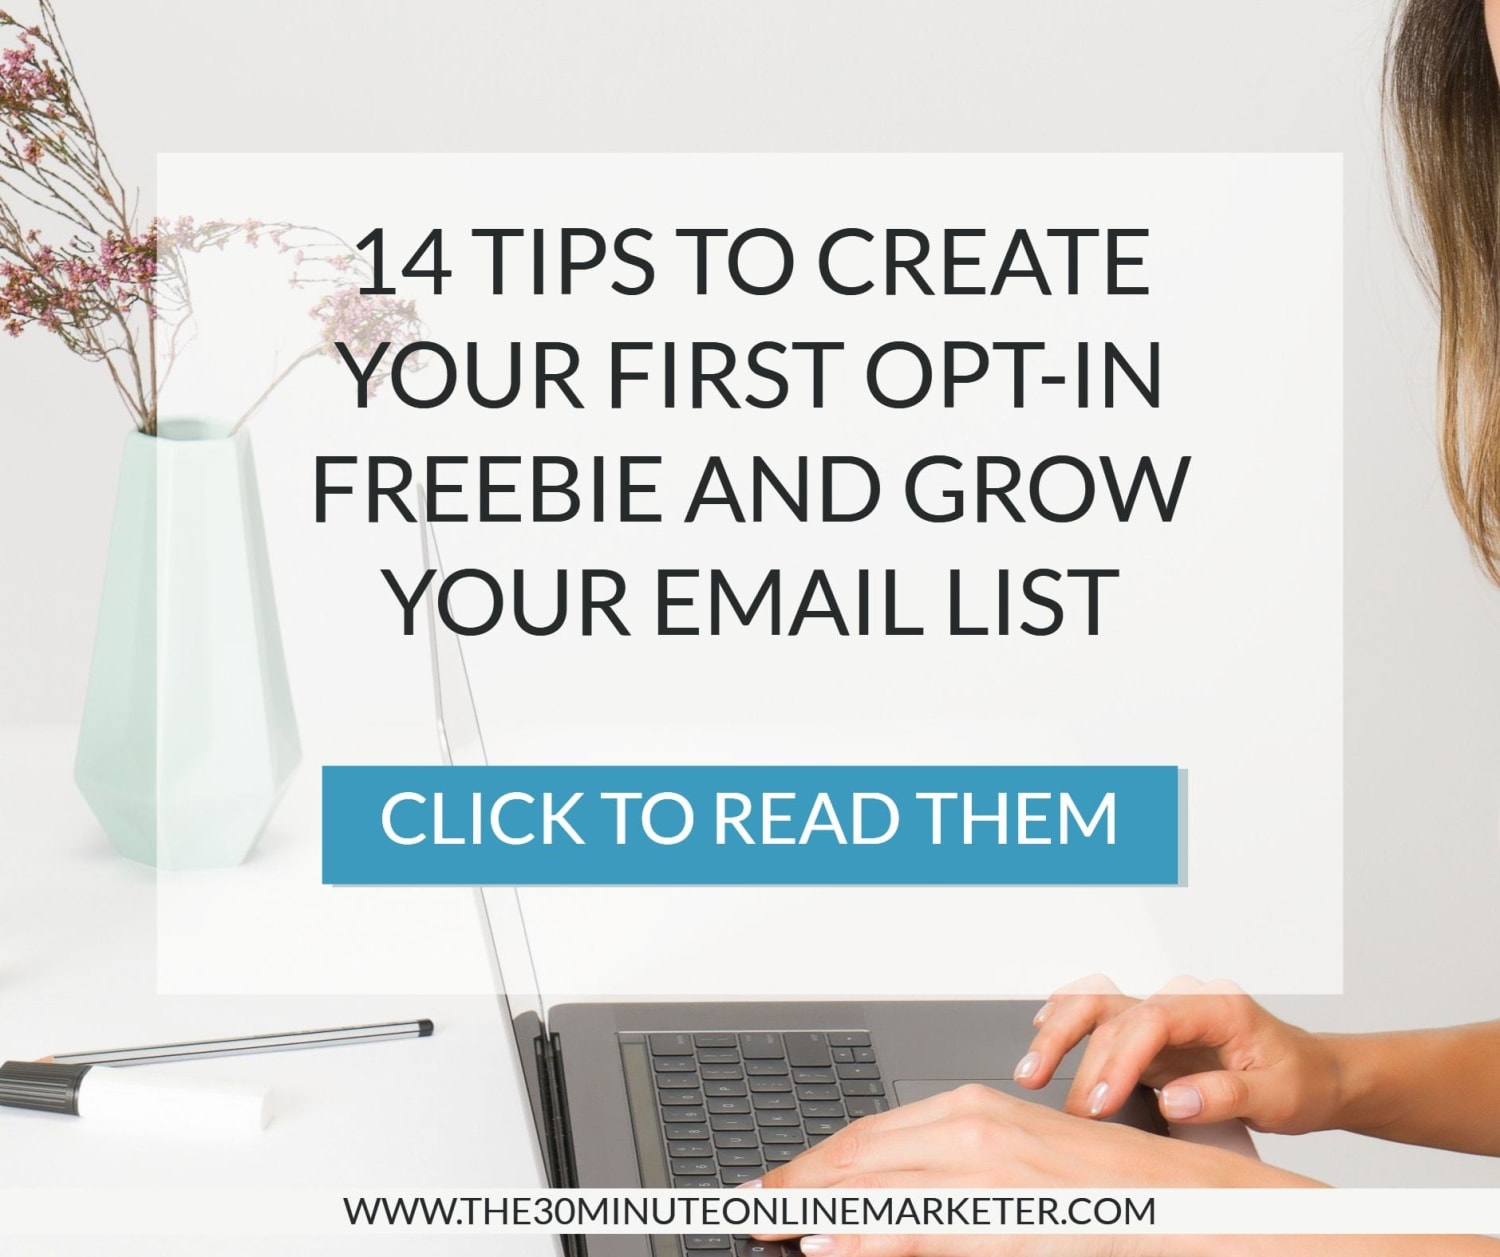 Best tips to create your first opt-in freebie